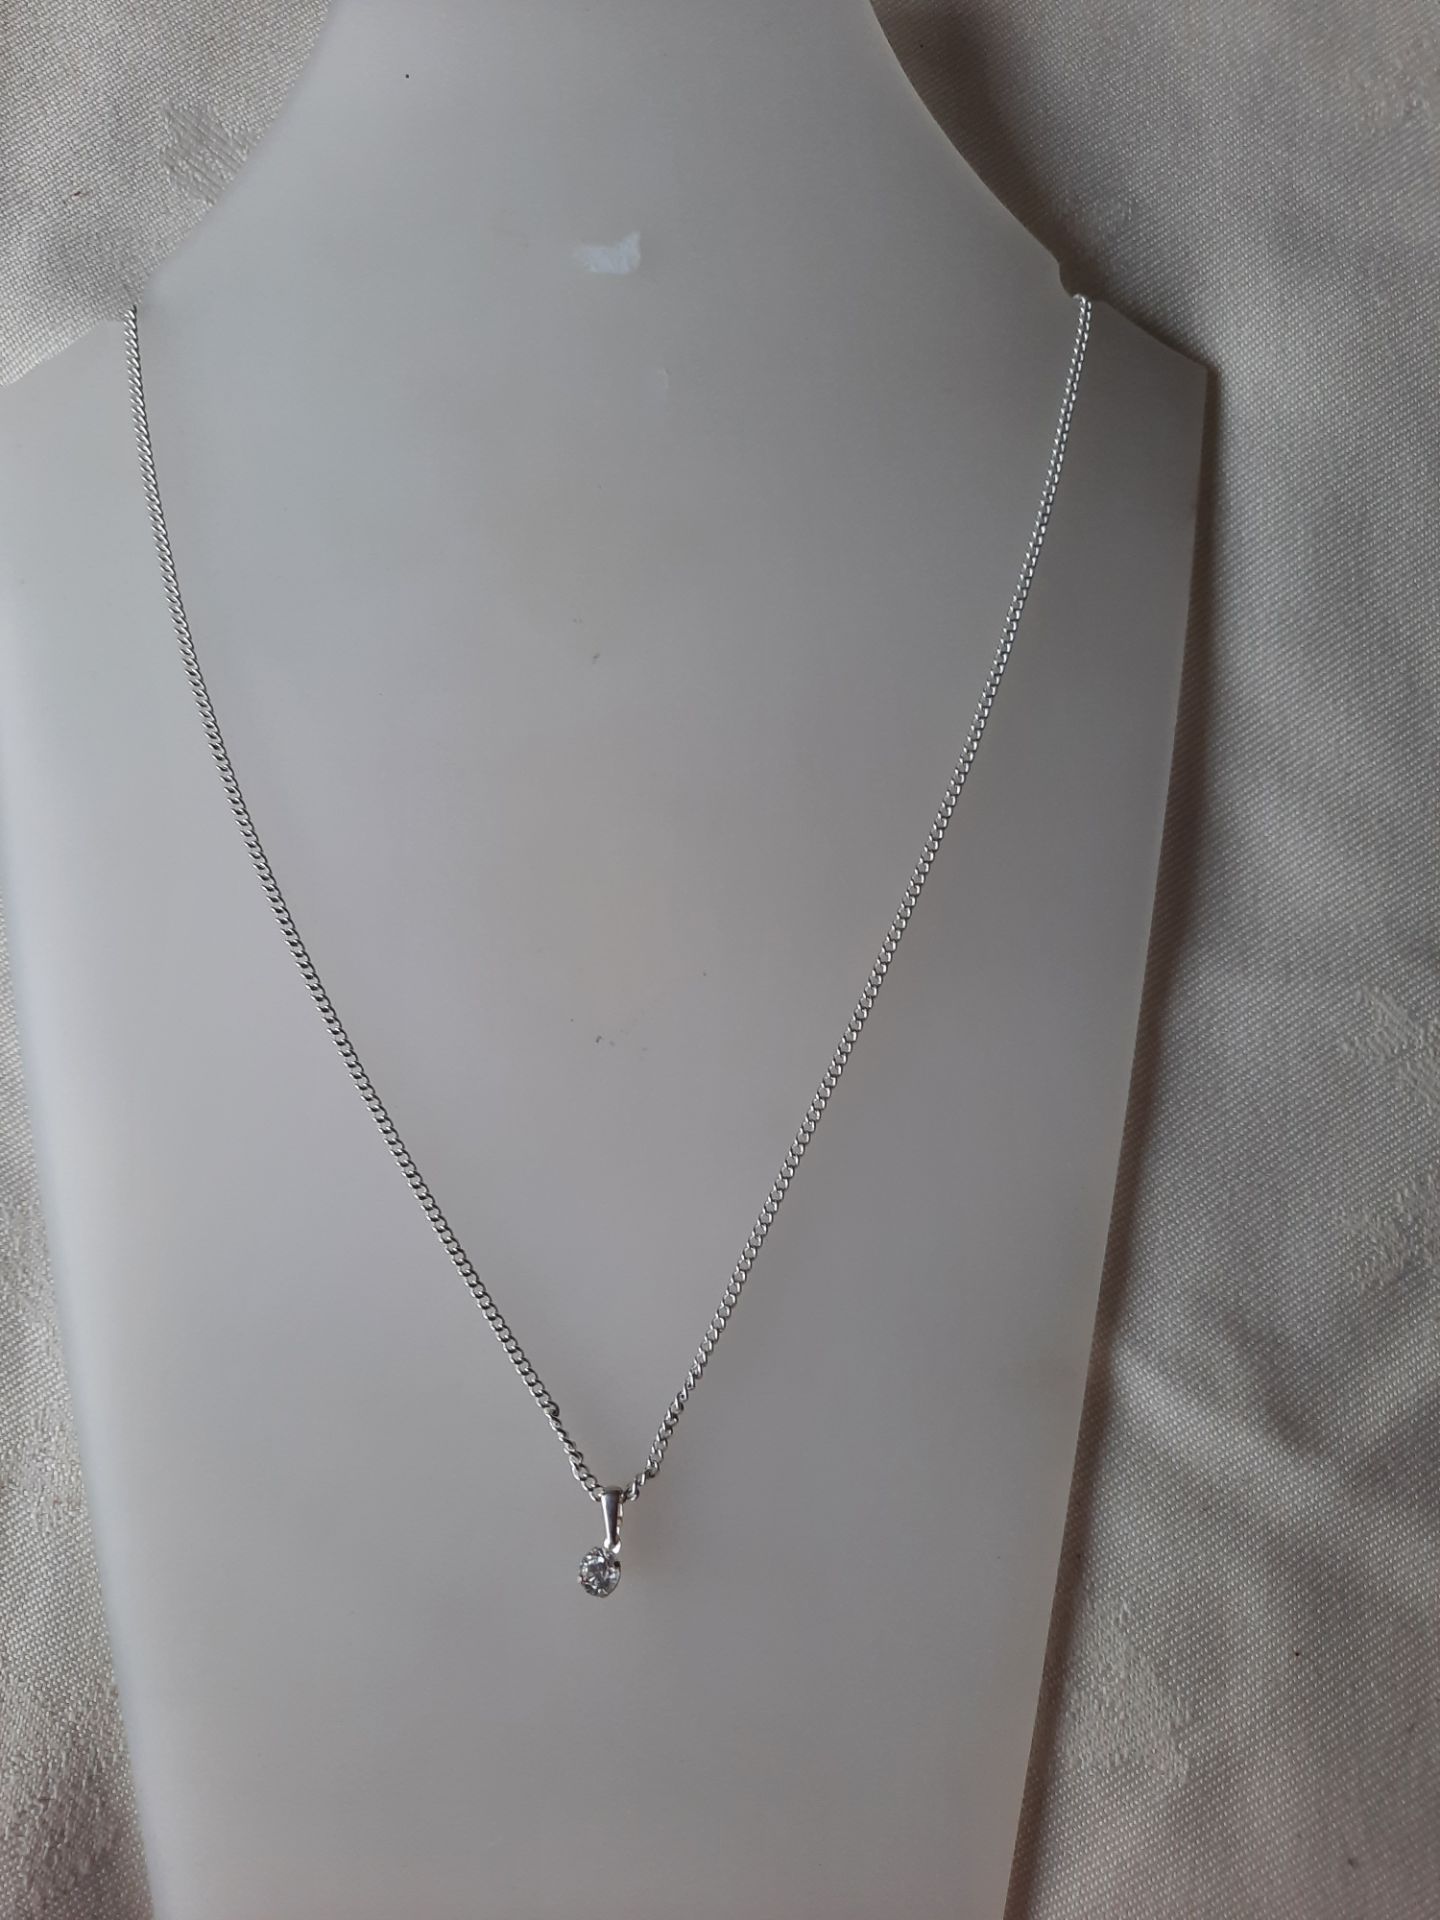 Pendant and Chain Necklace. CZ Stones RRP £34.99 - Image 3 of 8